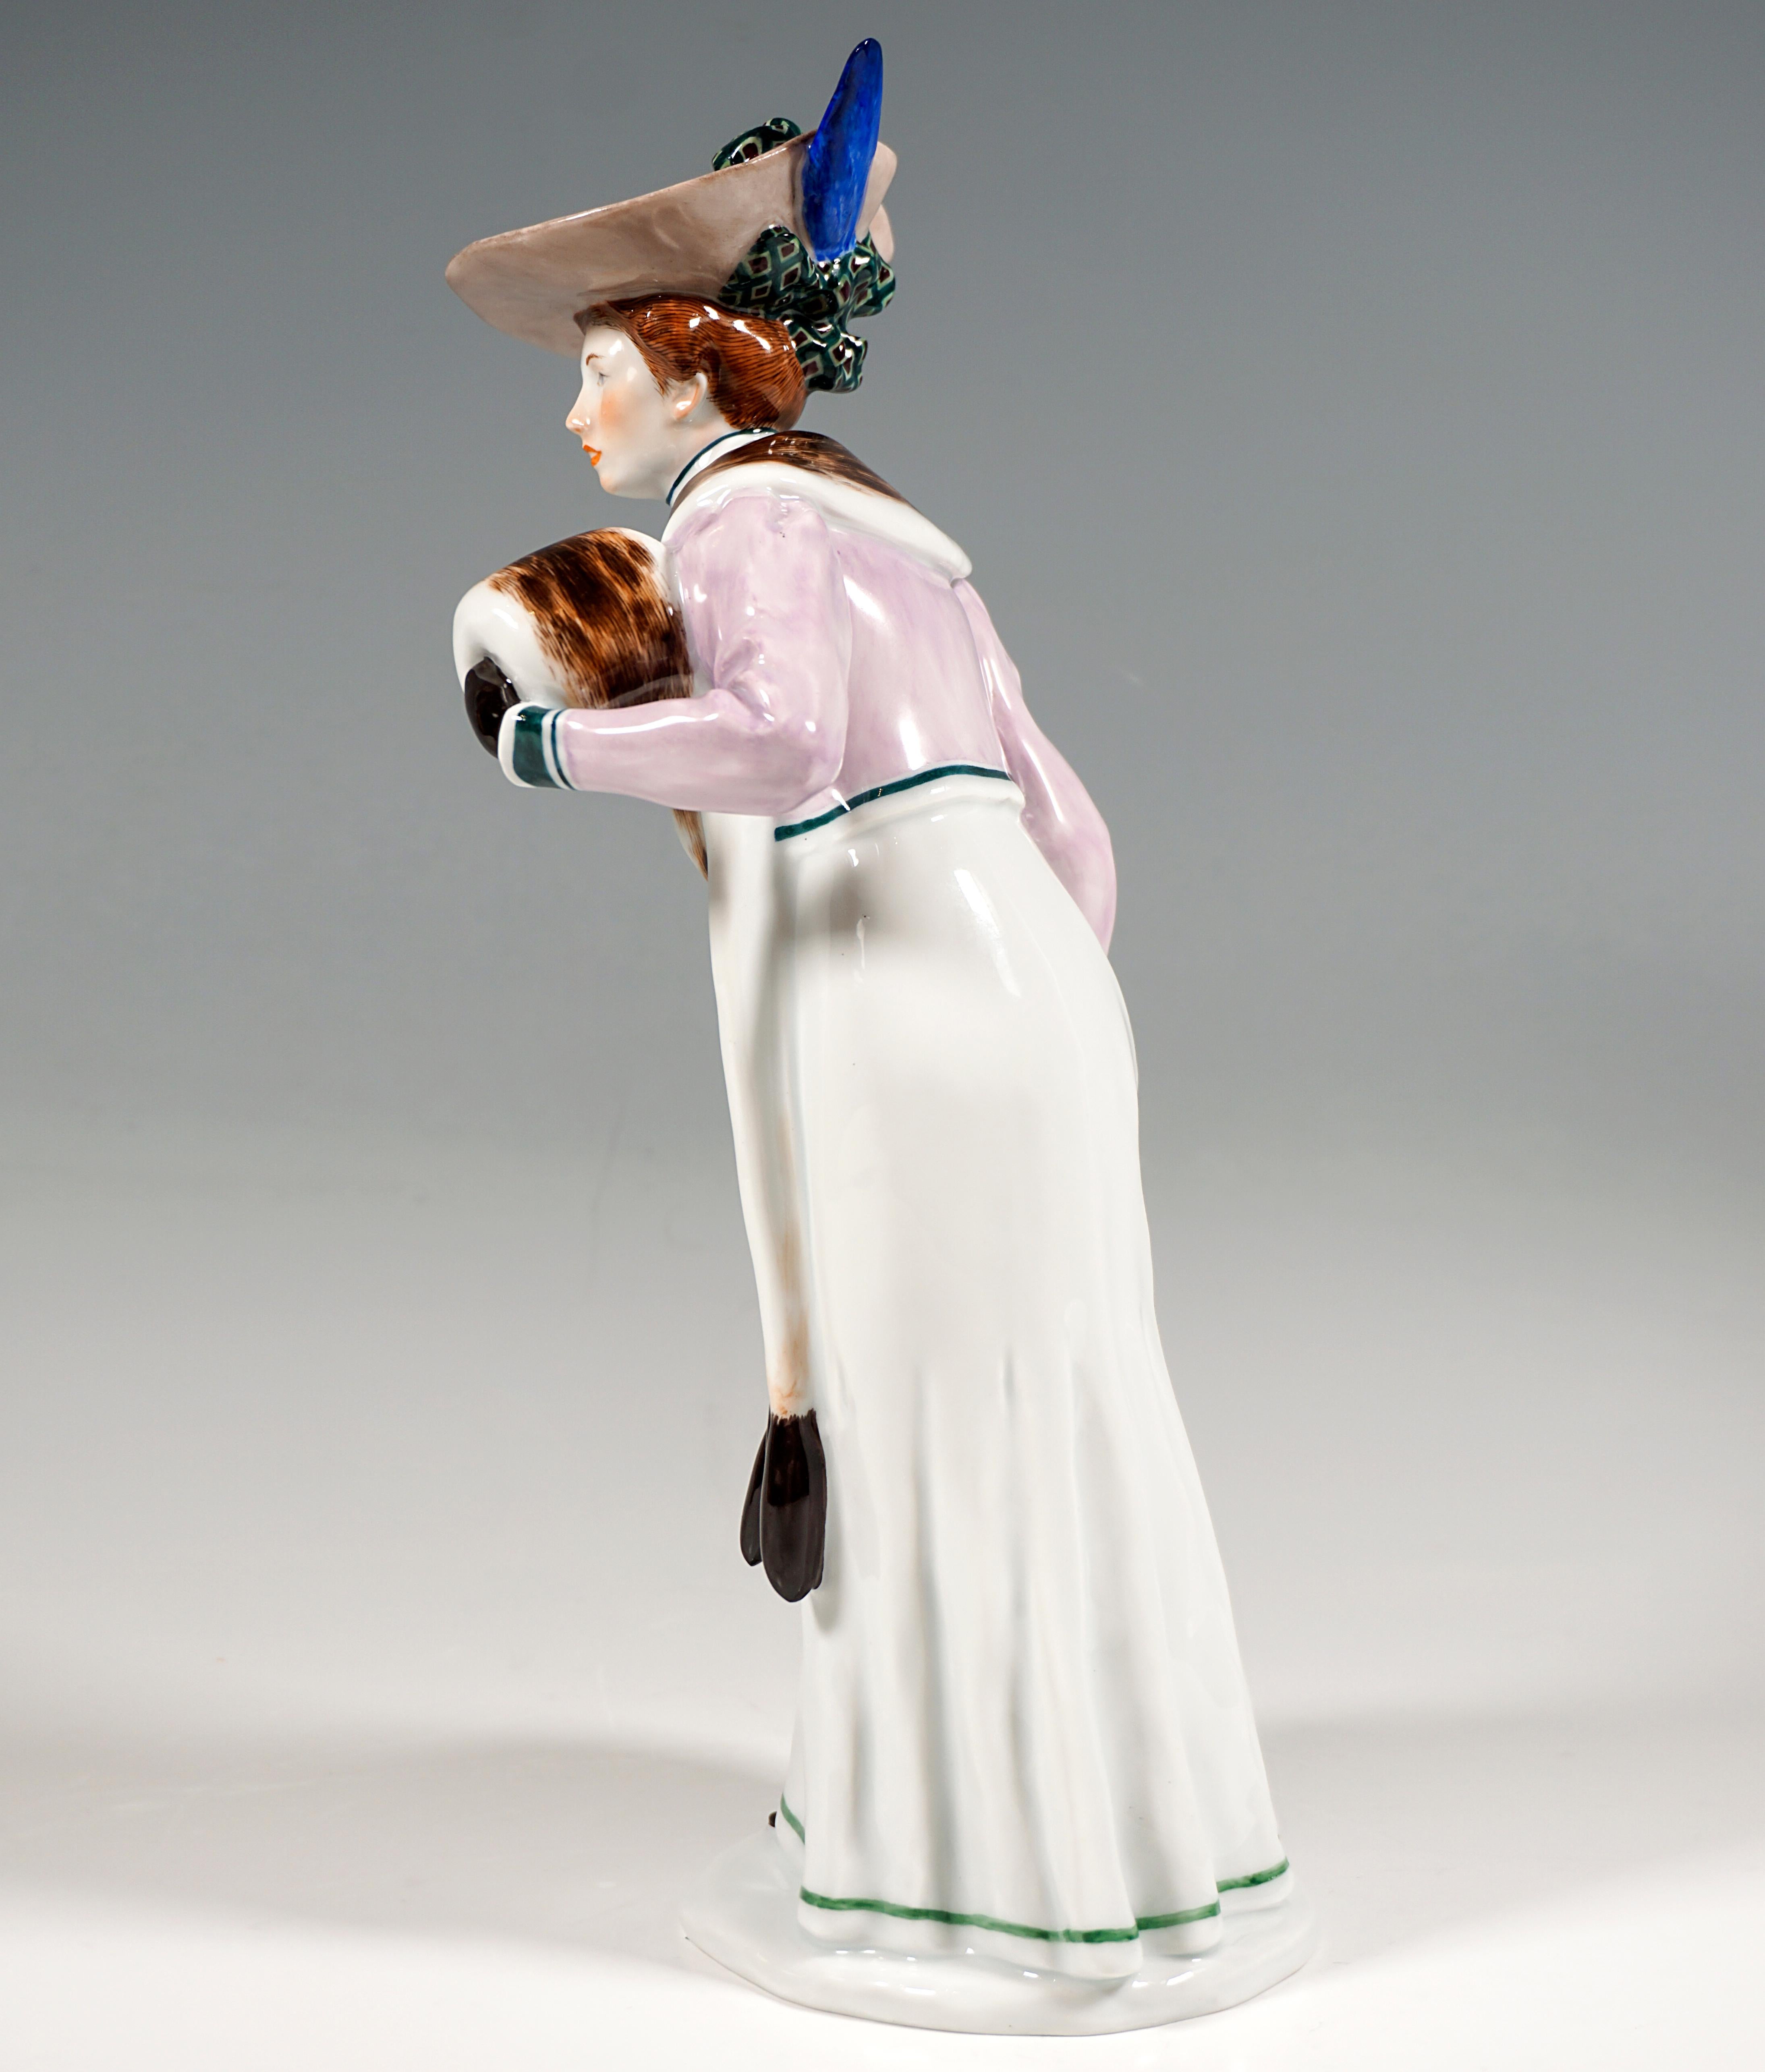 Hand-Crafted Meissen Art Nouveau Figurine, Lady With Muff, by Konrad Hentschel, ca 1906 For Sale